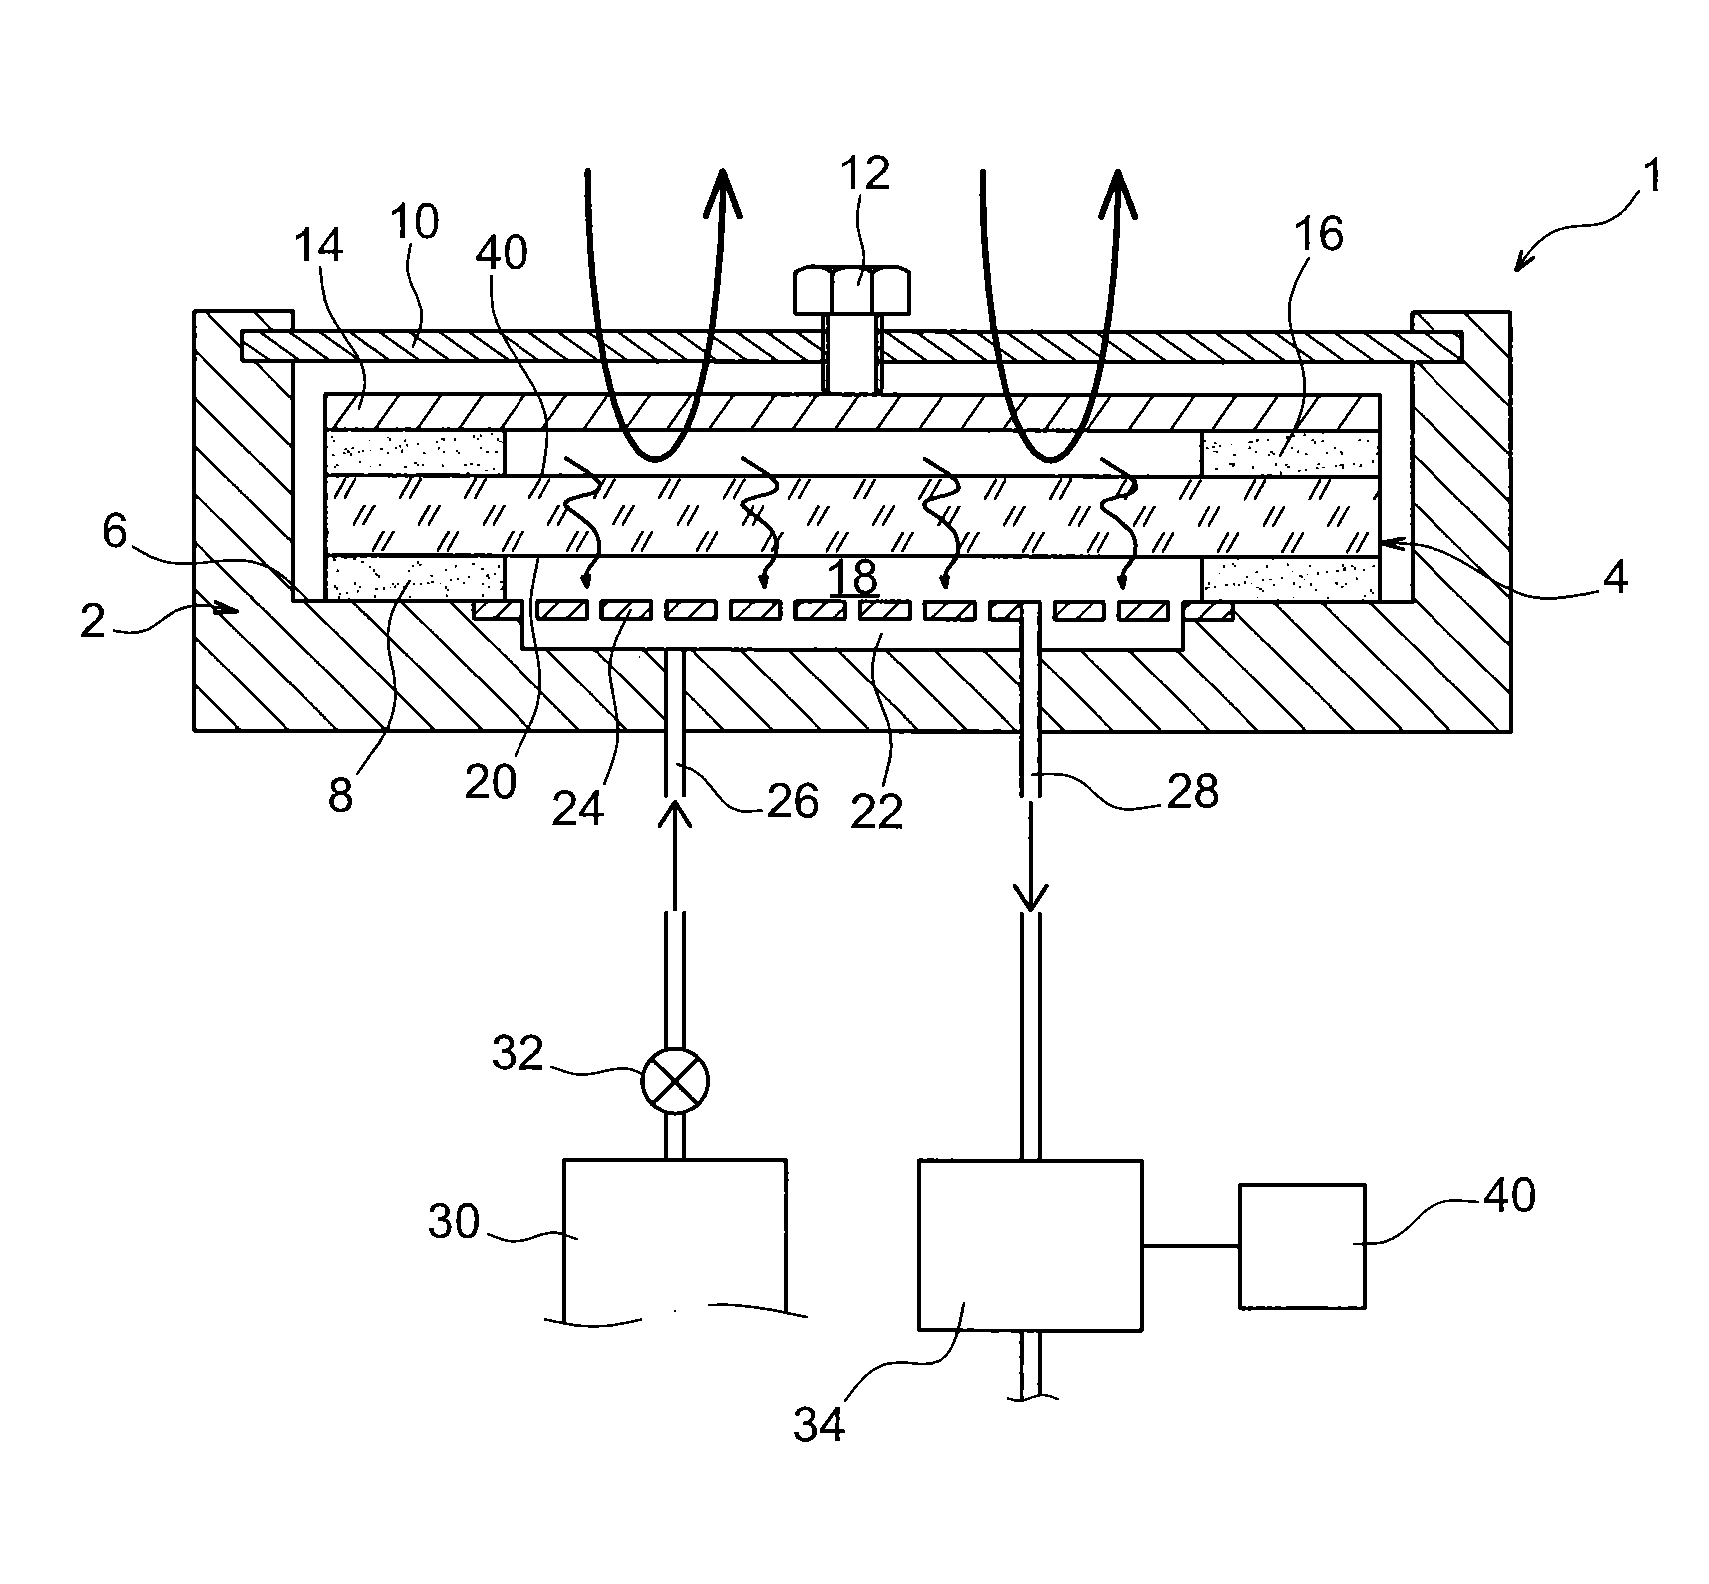 Non-destructive method for testing the seal of an electrolyte of an electrochemical cell